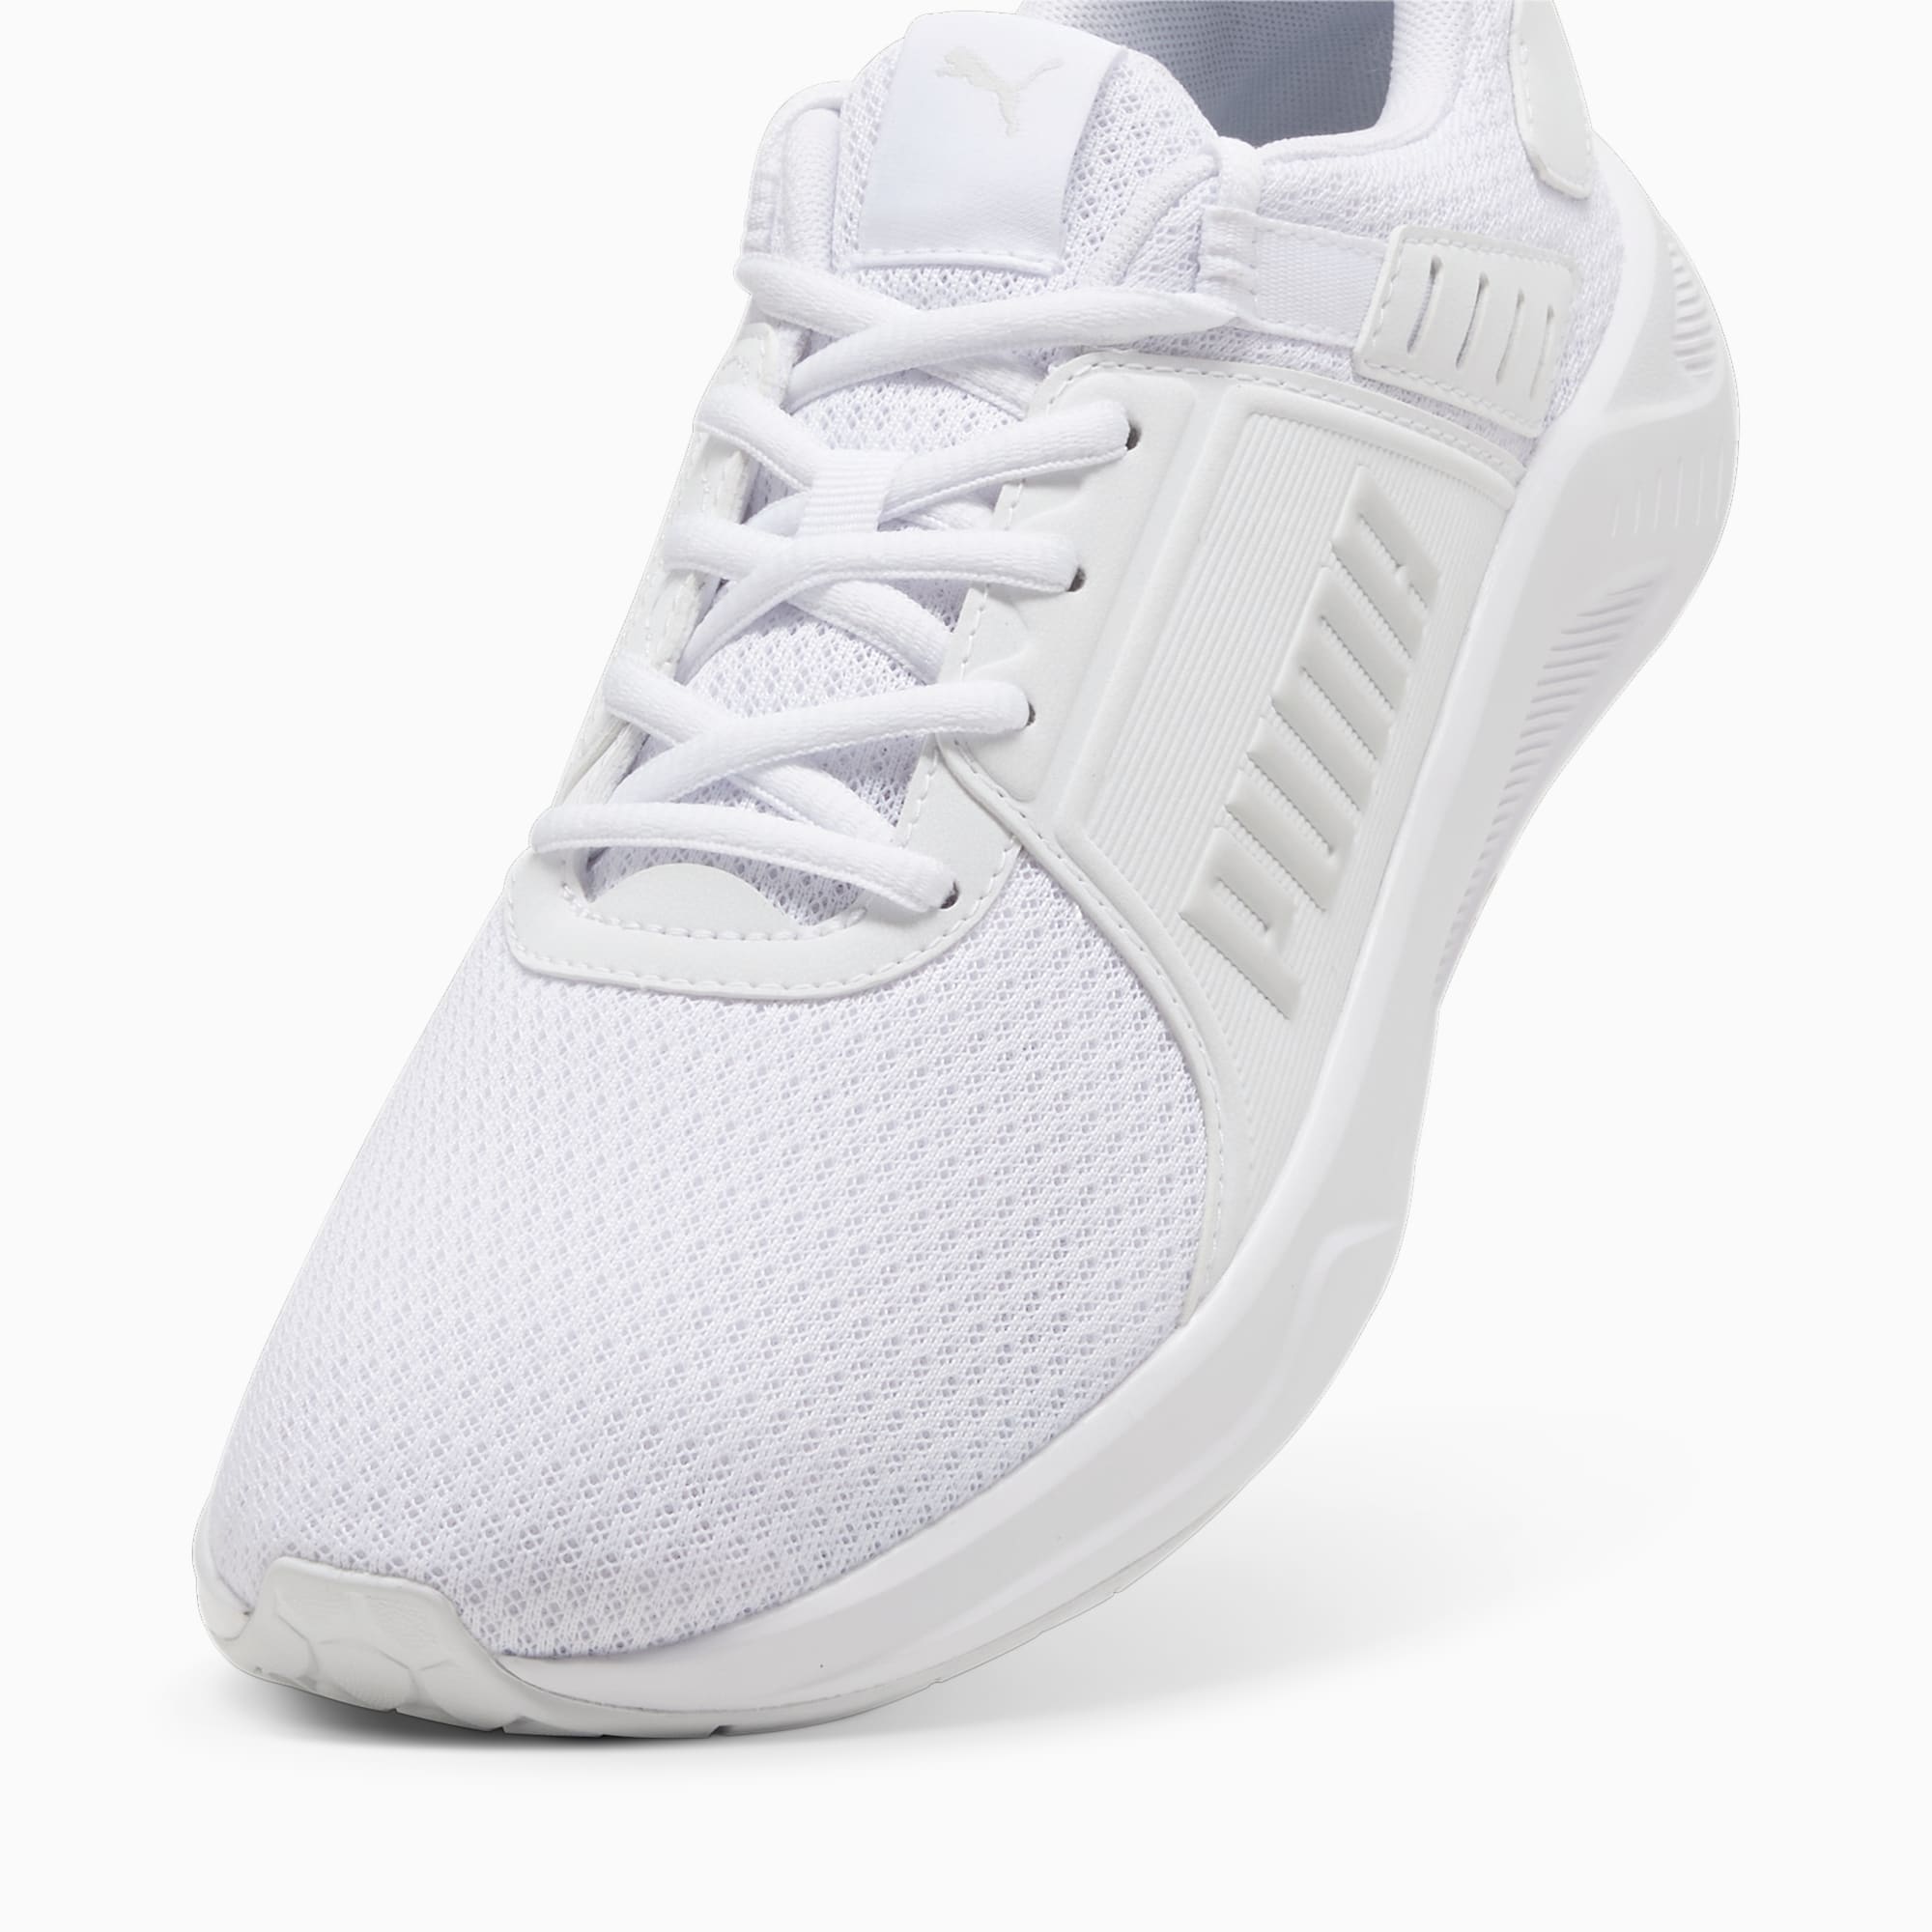 Women's PUMA Ftr Connect Training Shoes, White/Feather Grey, Size 35,5, Shoes